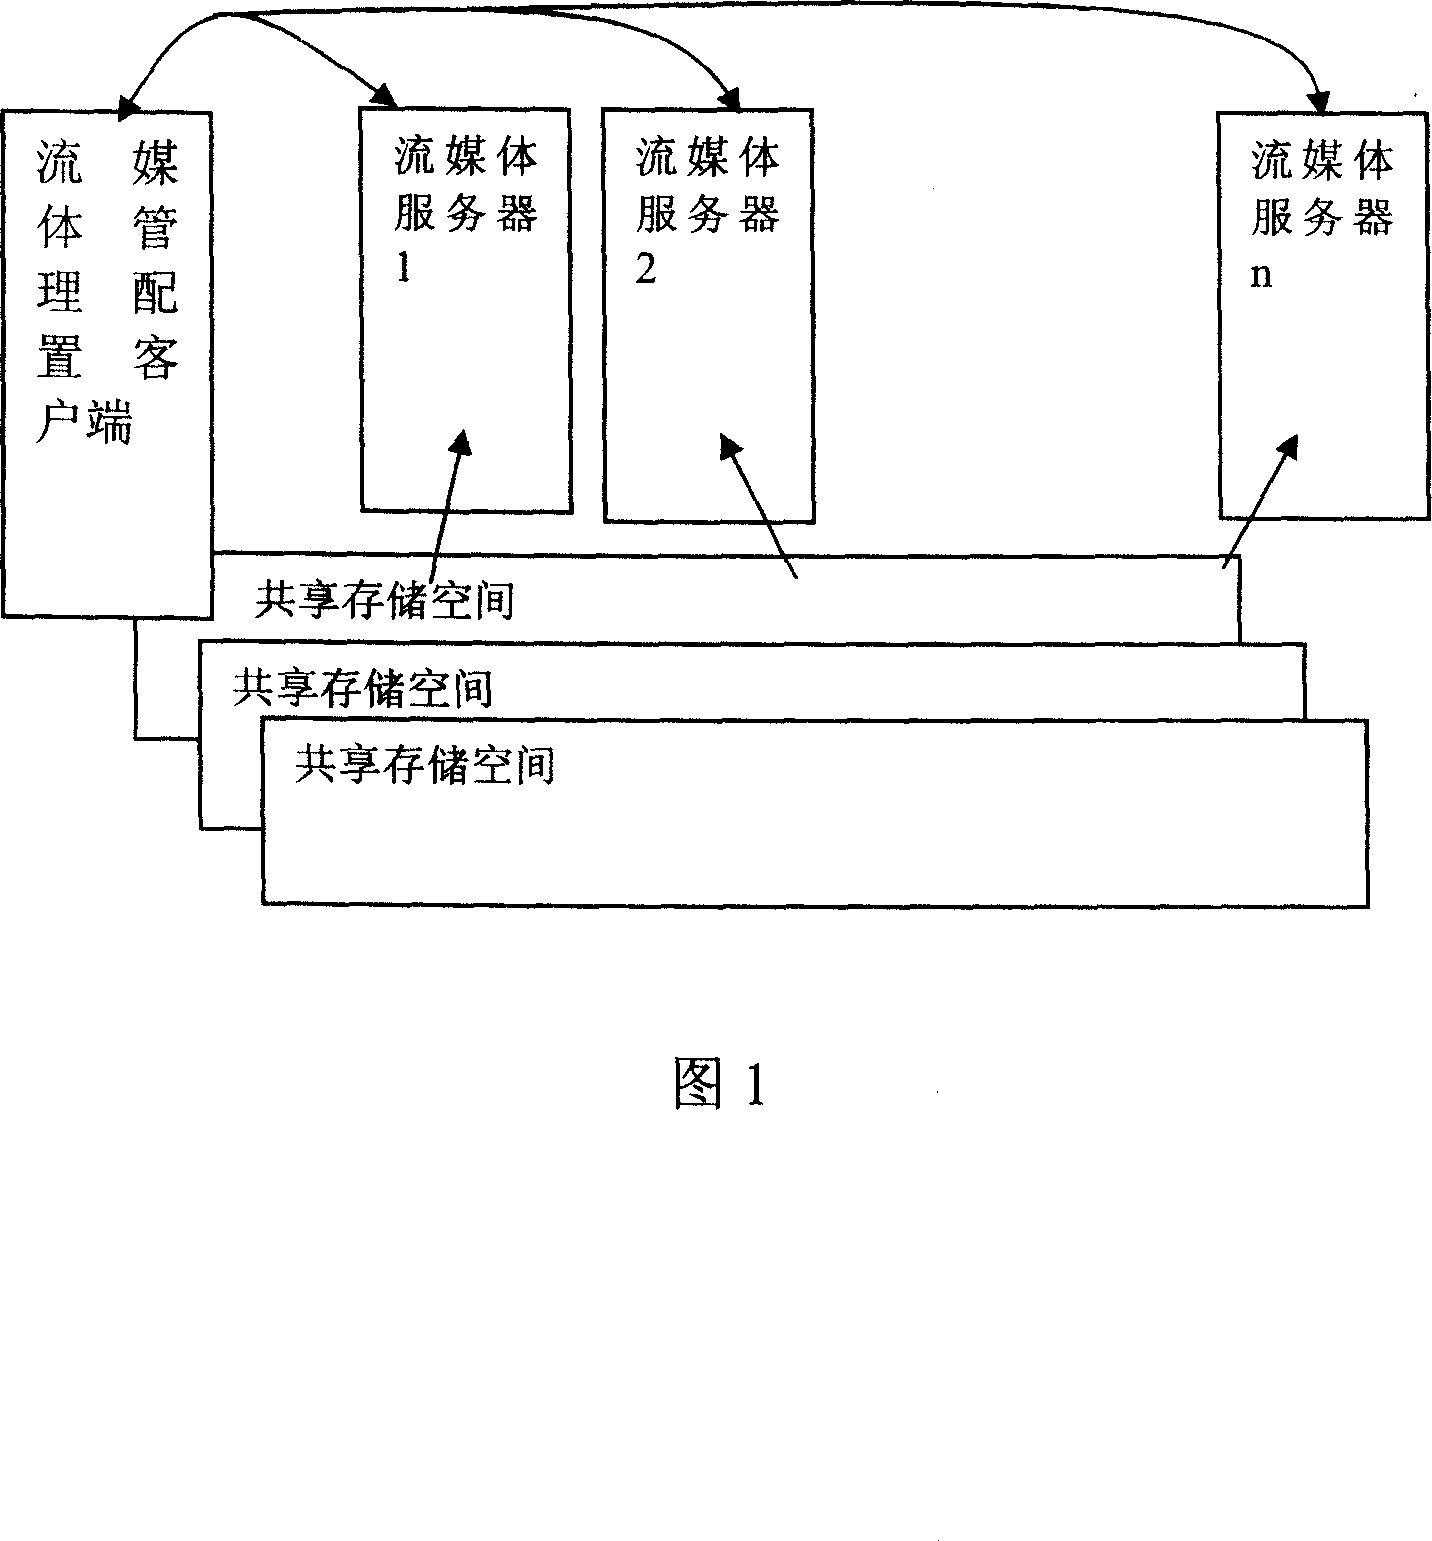 Static program distribution and service method in cluster type stream media system